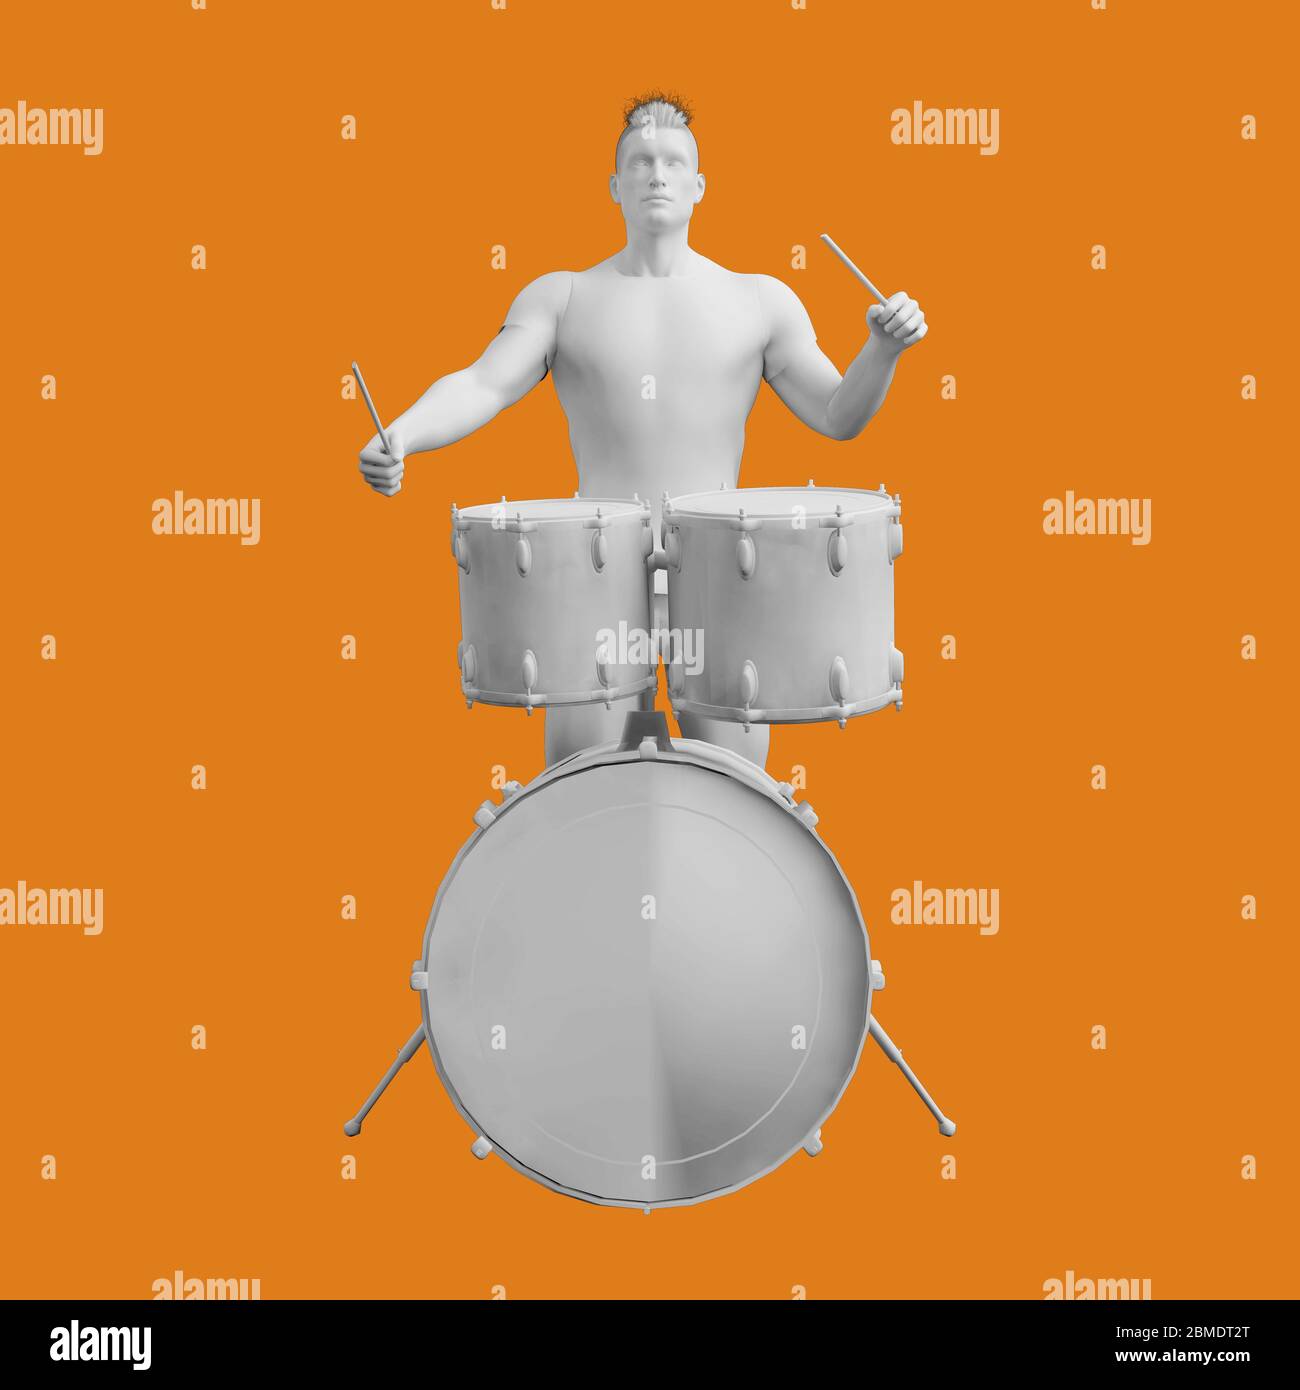 Drummer Drum Player Playing in Concert Concept Stock Photo